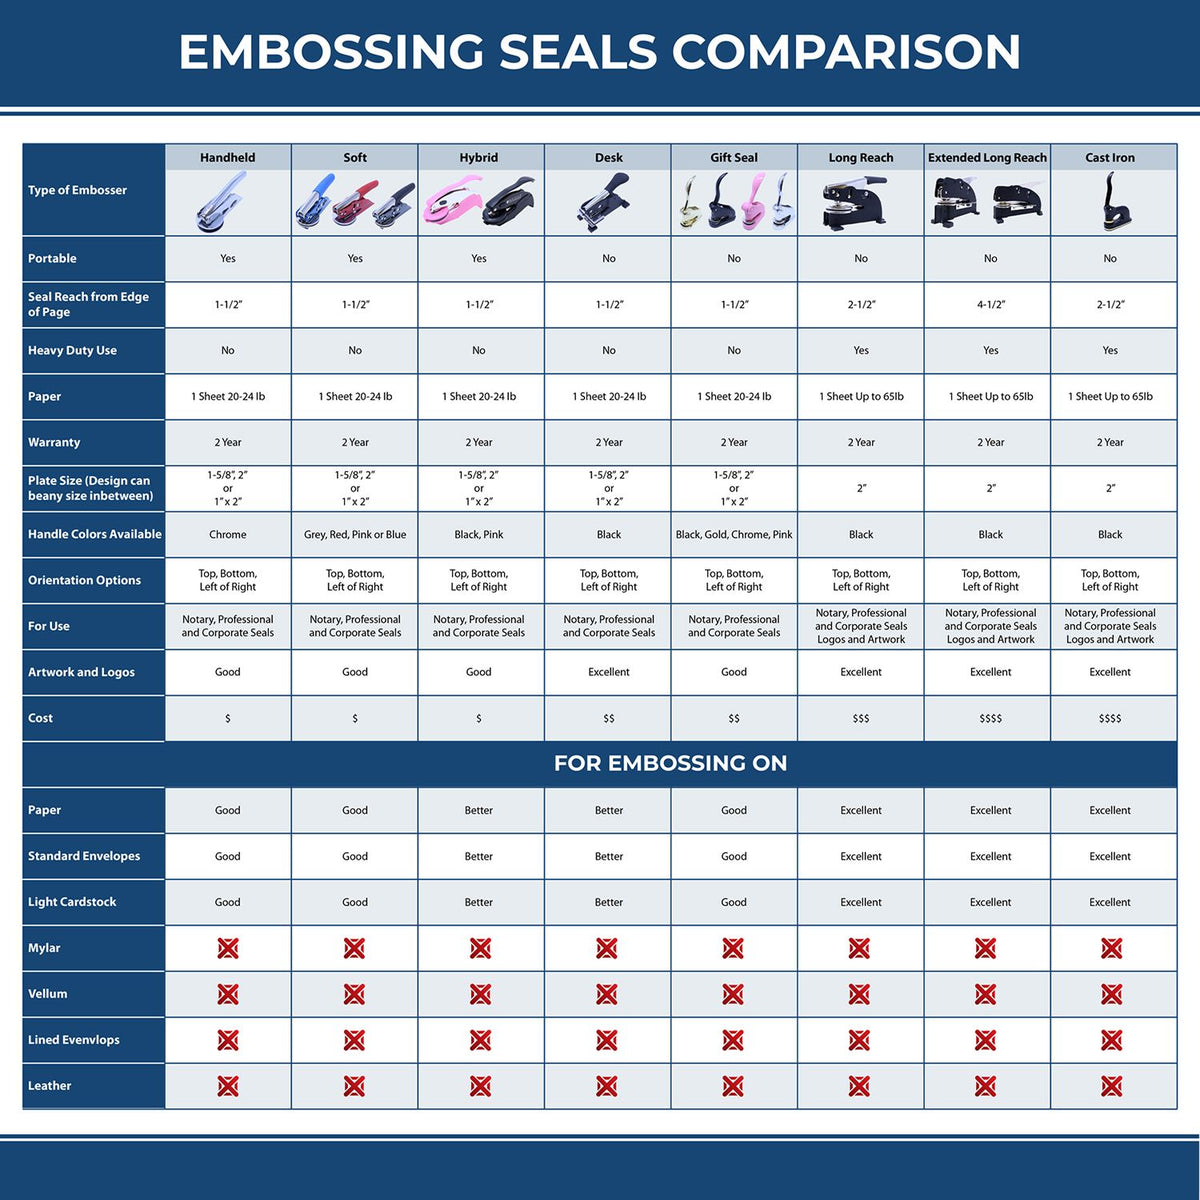 A comparison chart for the different types of mount models available for the Heavy Duty Cast Iron Texas Engineer Seal Embosser.